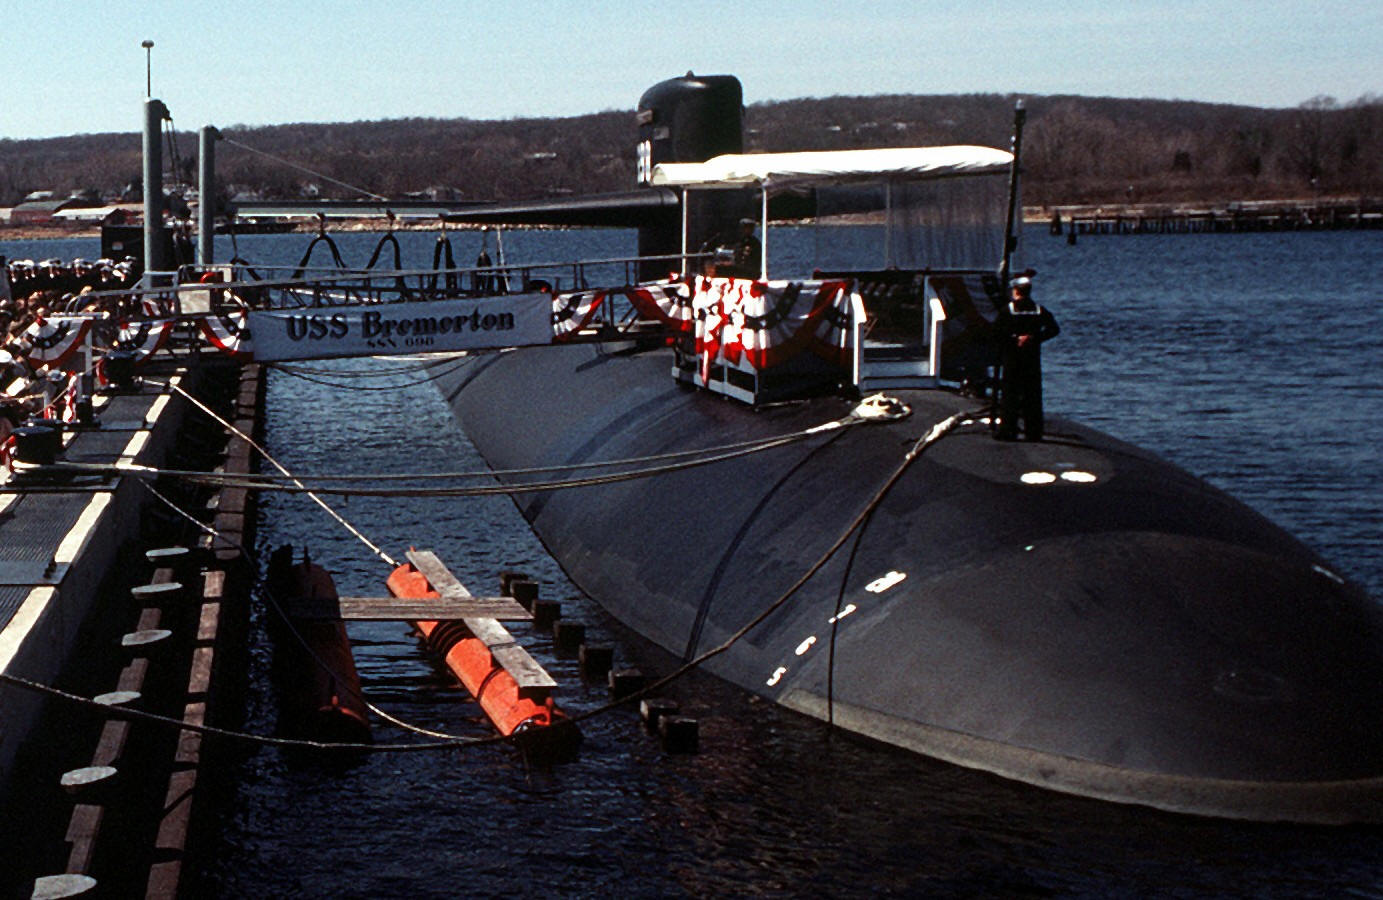 ssn-698 uss bremerton commissioning ceremony march 1981